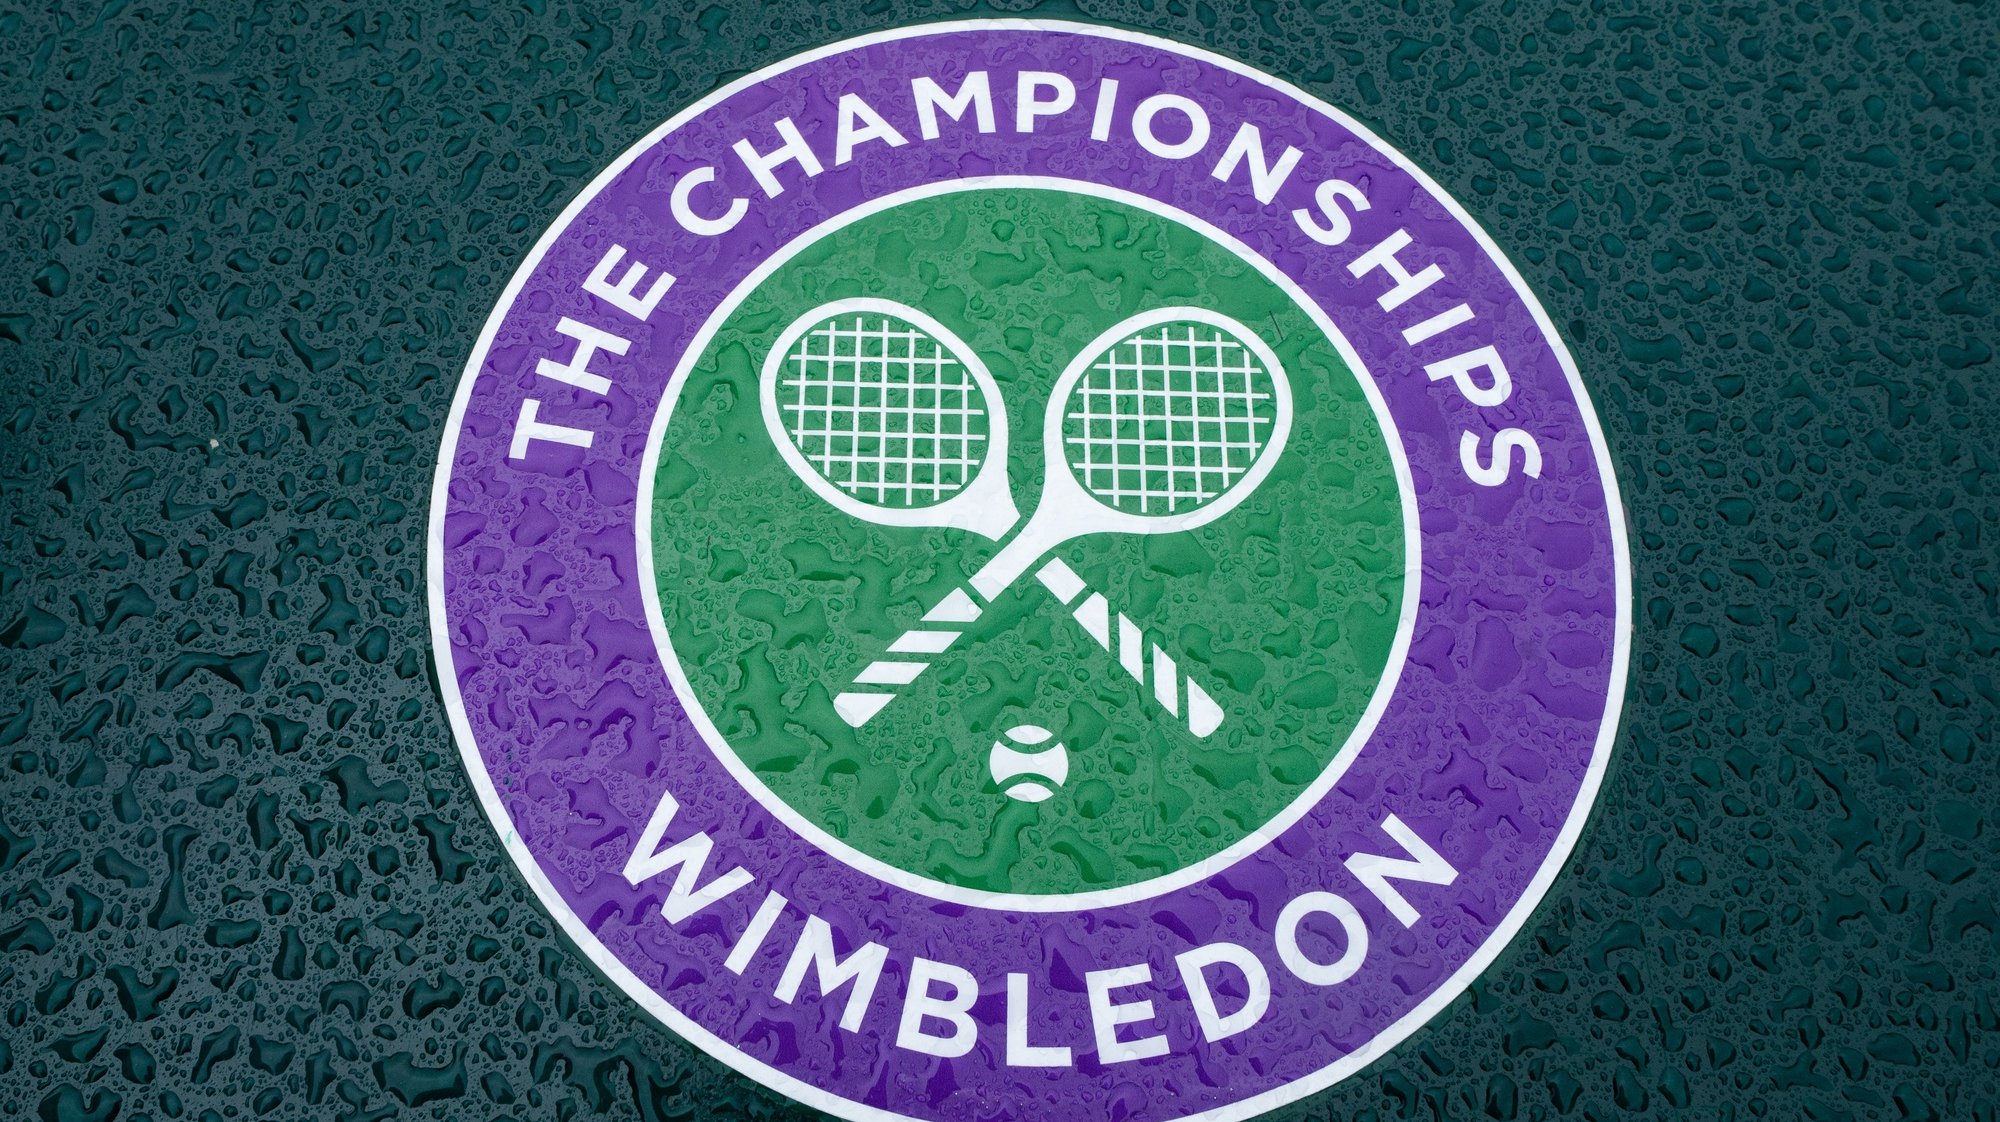 epa08513898 Detail of a wet Wimbledon logo at the All England Lawn Tennis Club on a stormy Saturday 27th June 2020 the weekend before The Championships were due to start on Monday 29th June 2020. The grounds are quiet and still, normally they would be busy and bustling with players practising and groundsmen and staff making the final detailed preparations. The Championships have been cancelled due to the Coronavirus pandemic.  EPA/AELTC/Bob Martin HANDOUT  HANDOUT EDITORIAL USE ONLY/NO SALES